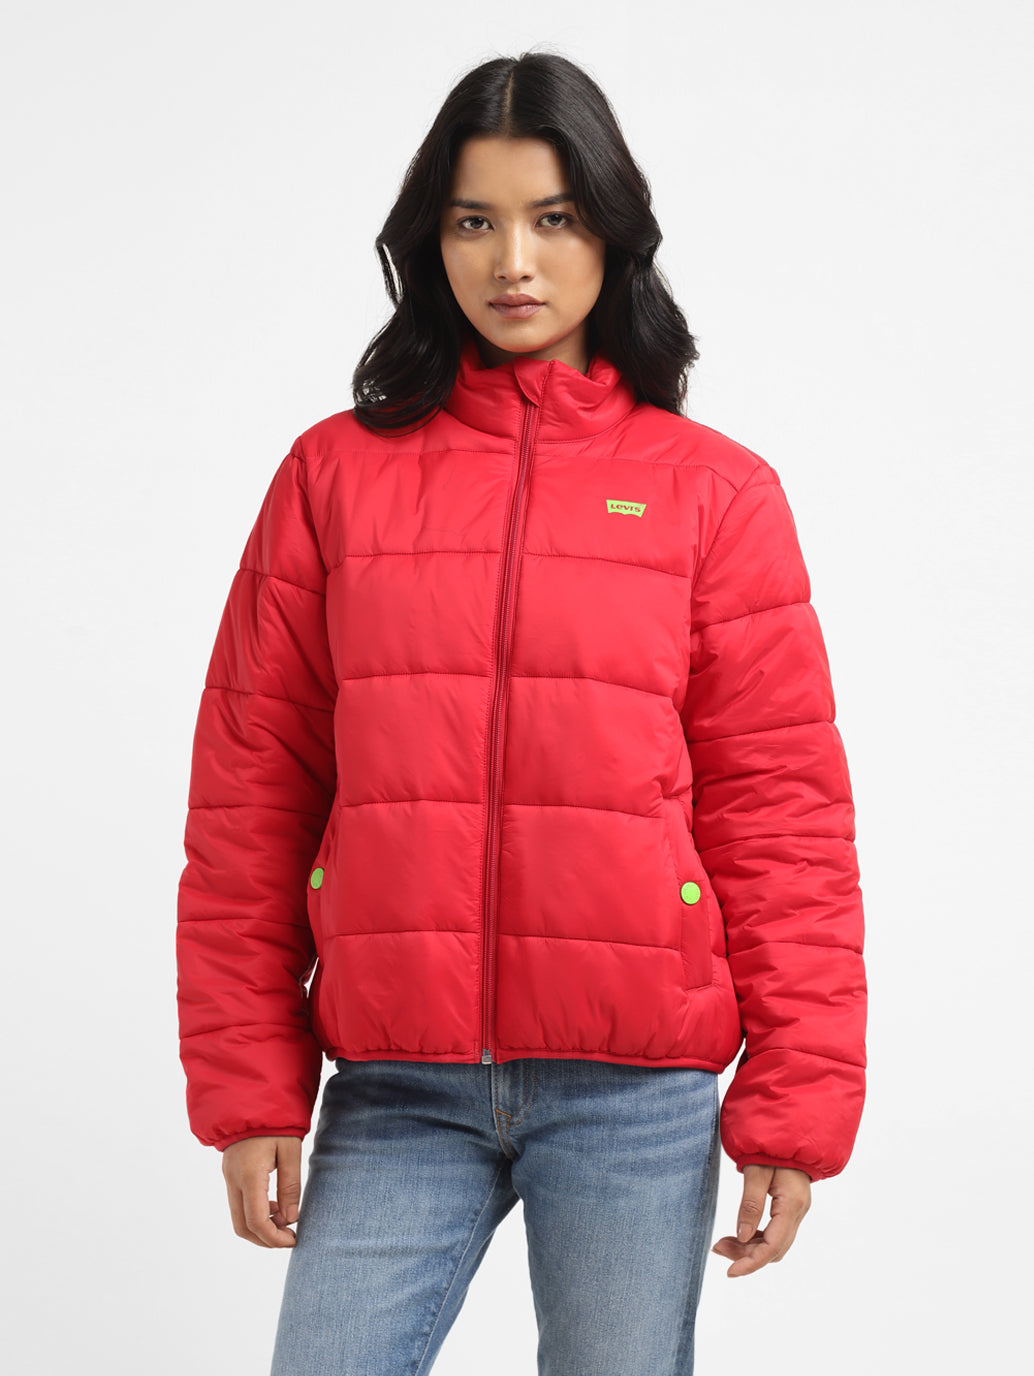 Women's Solid Red High Neck Jacket